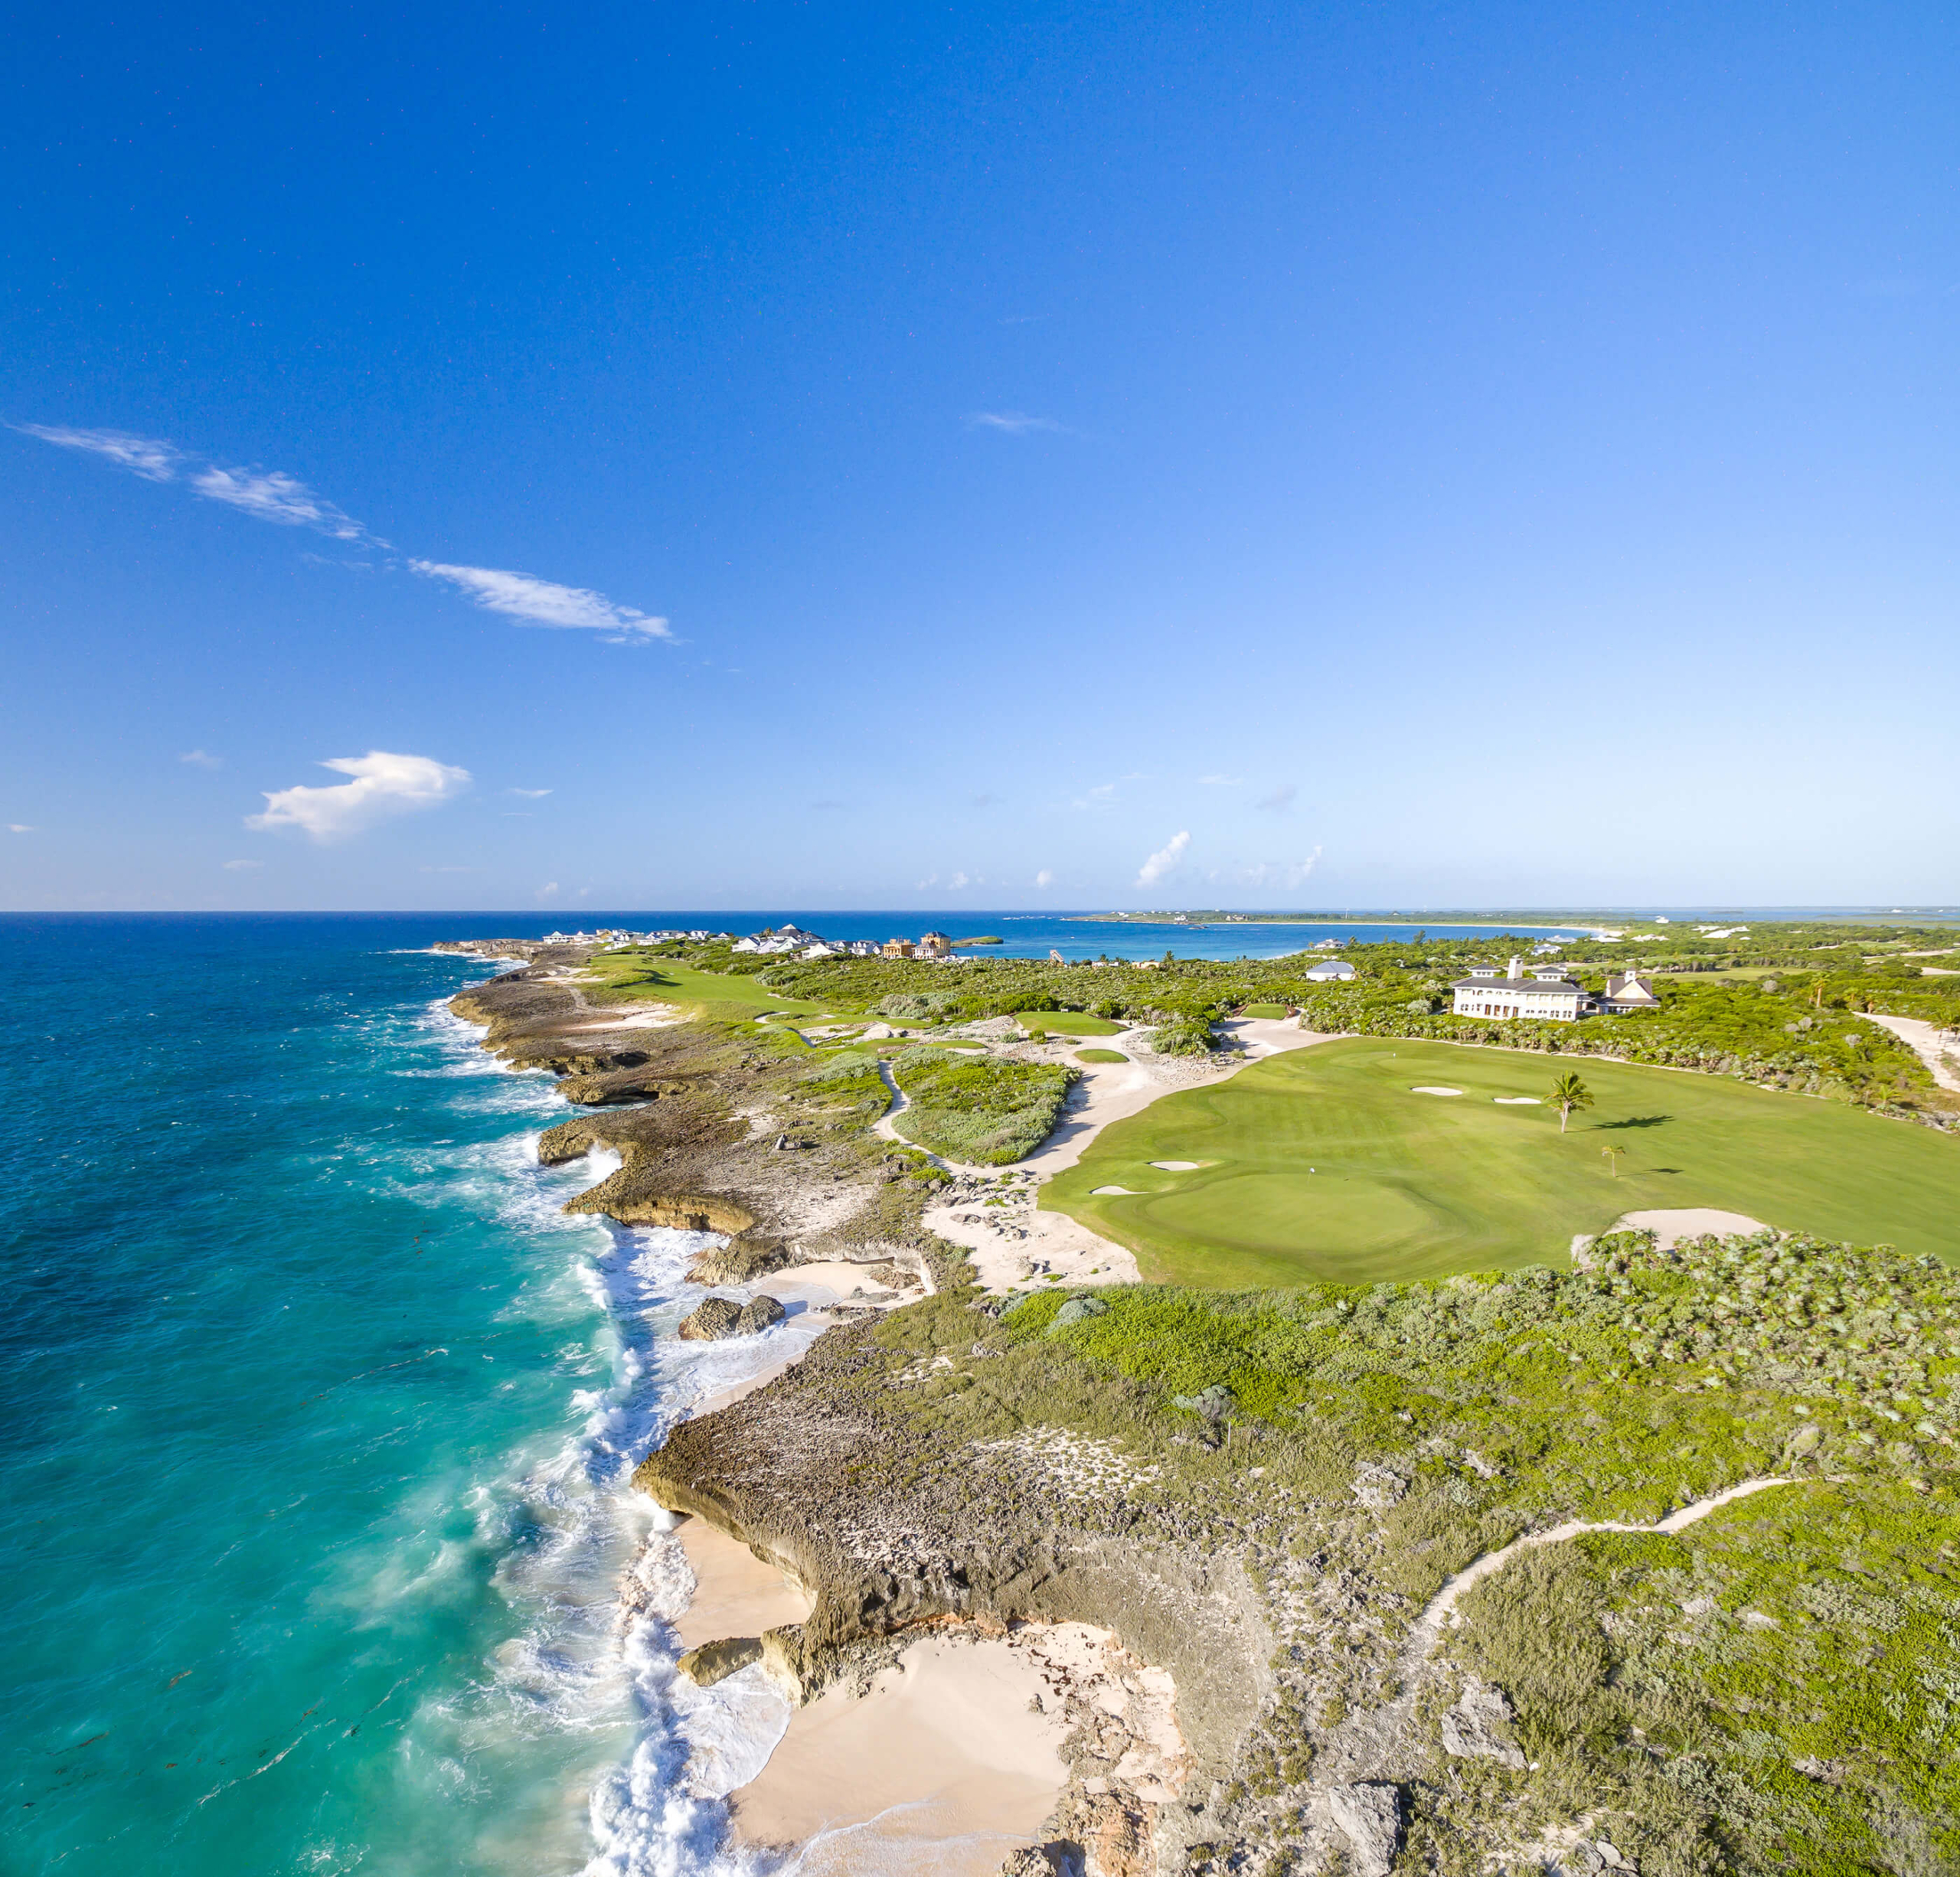 Panoramic aerial shot of The Abaco Club highlighting the golf club's 17th and 18th greens